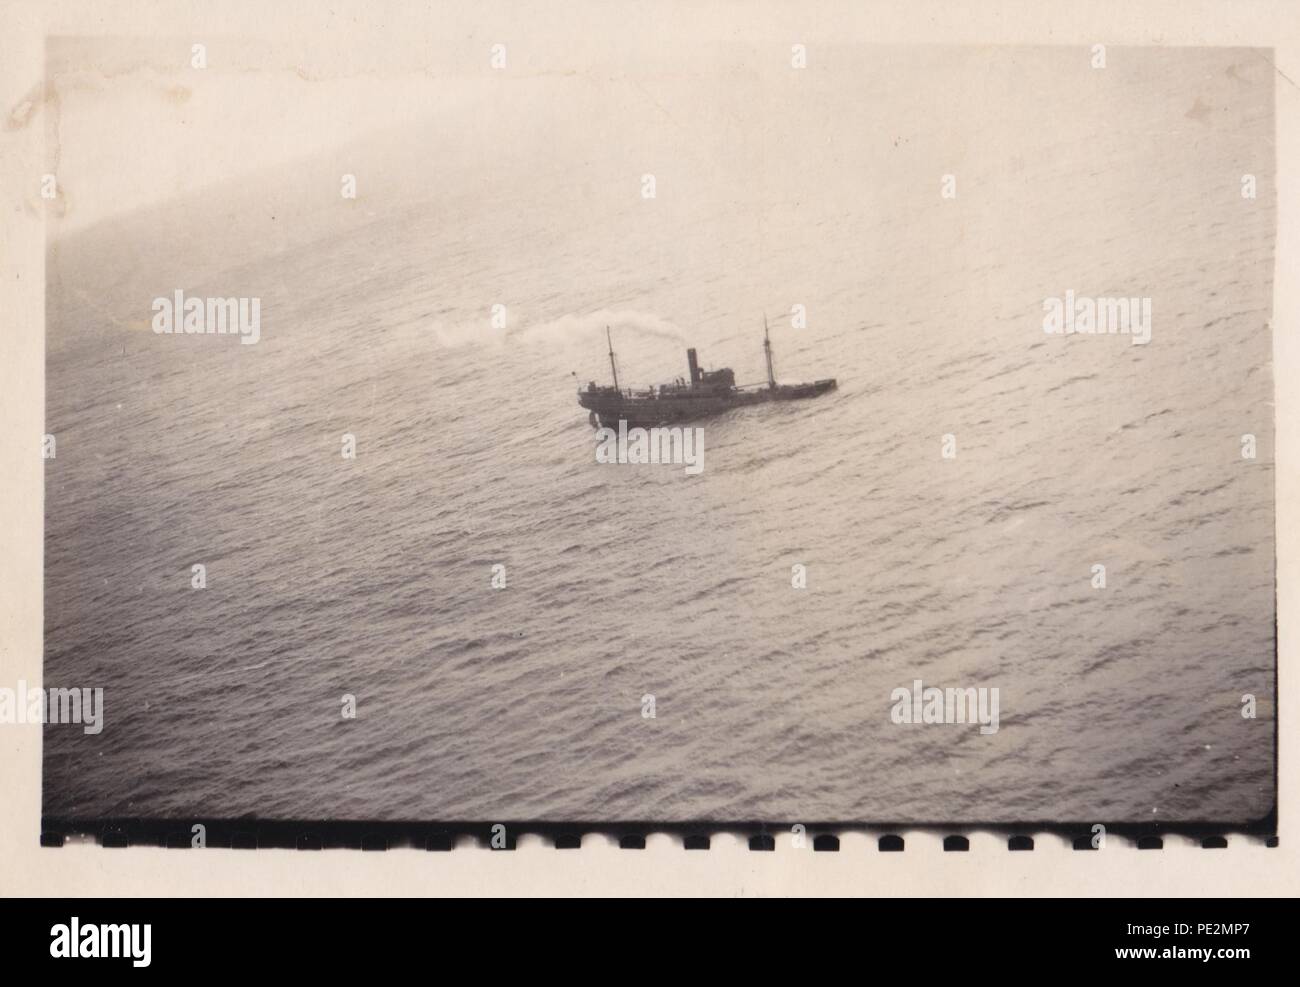 Image from the photo album of Oberfeldwebel Karl Gendner of 1. Staffel, Kampfgeschwader 40: Aerial photograph taken from a Focke Wulf FW 200 Condor of KG 40, showing a ship sinking in the Atlantic. This is probably MV Mamura, sunk by Leutnant Mayr and his crew on 19th March 1941. Stock Photo